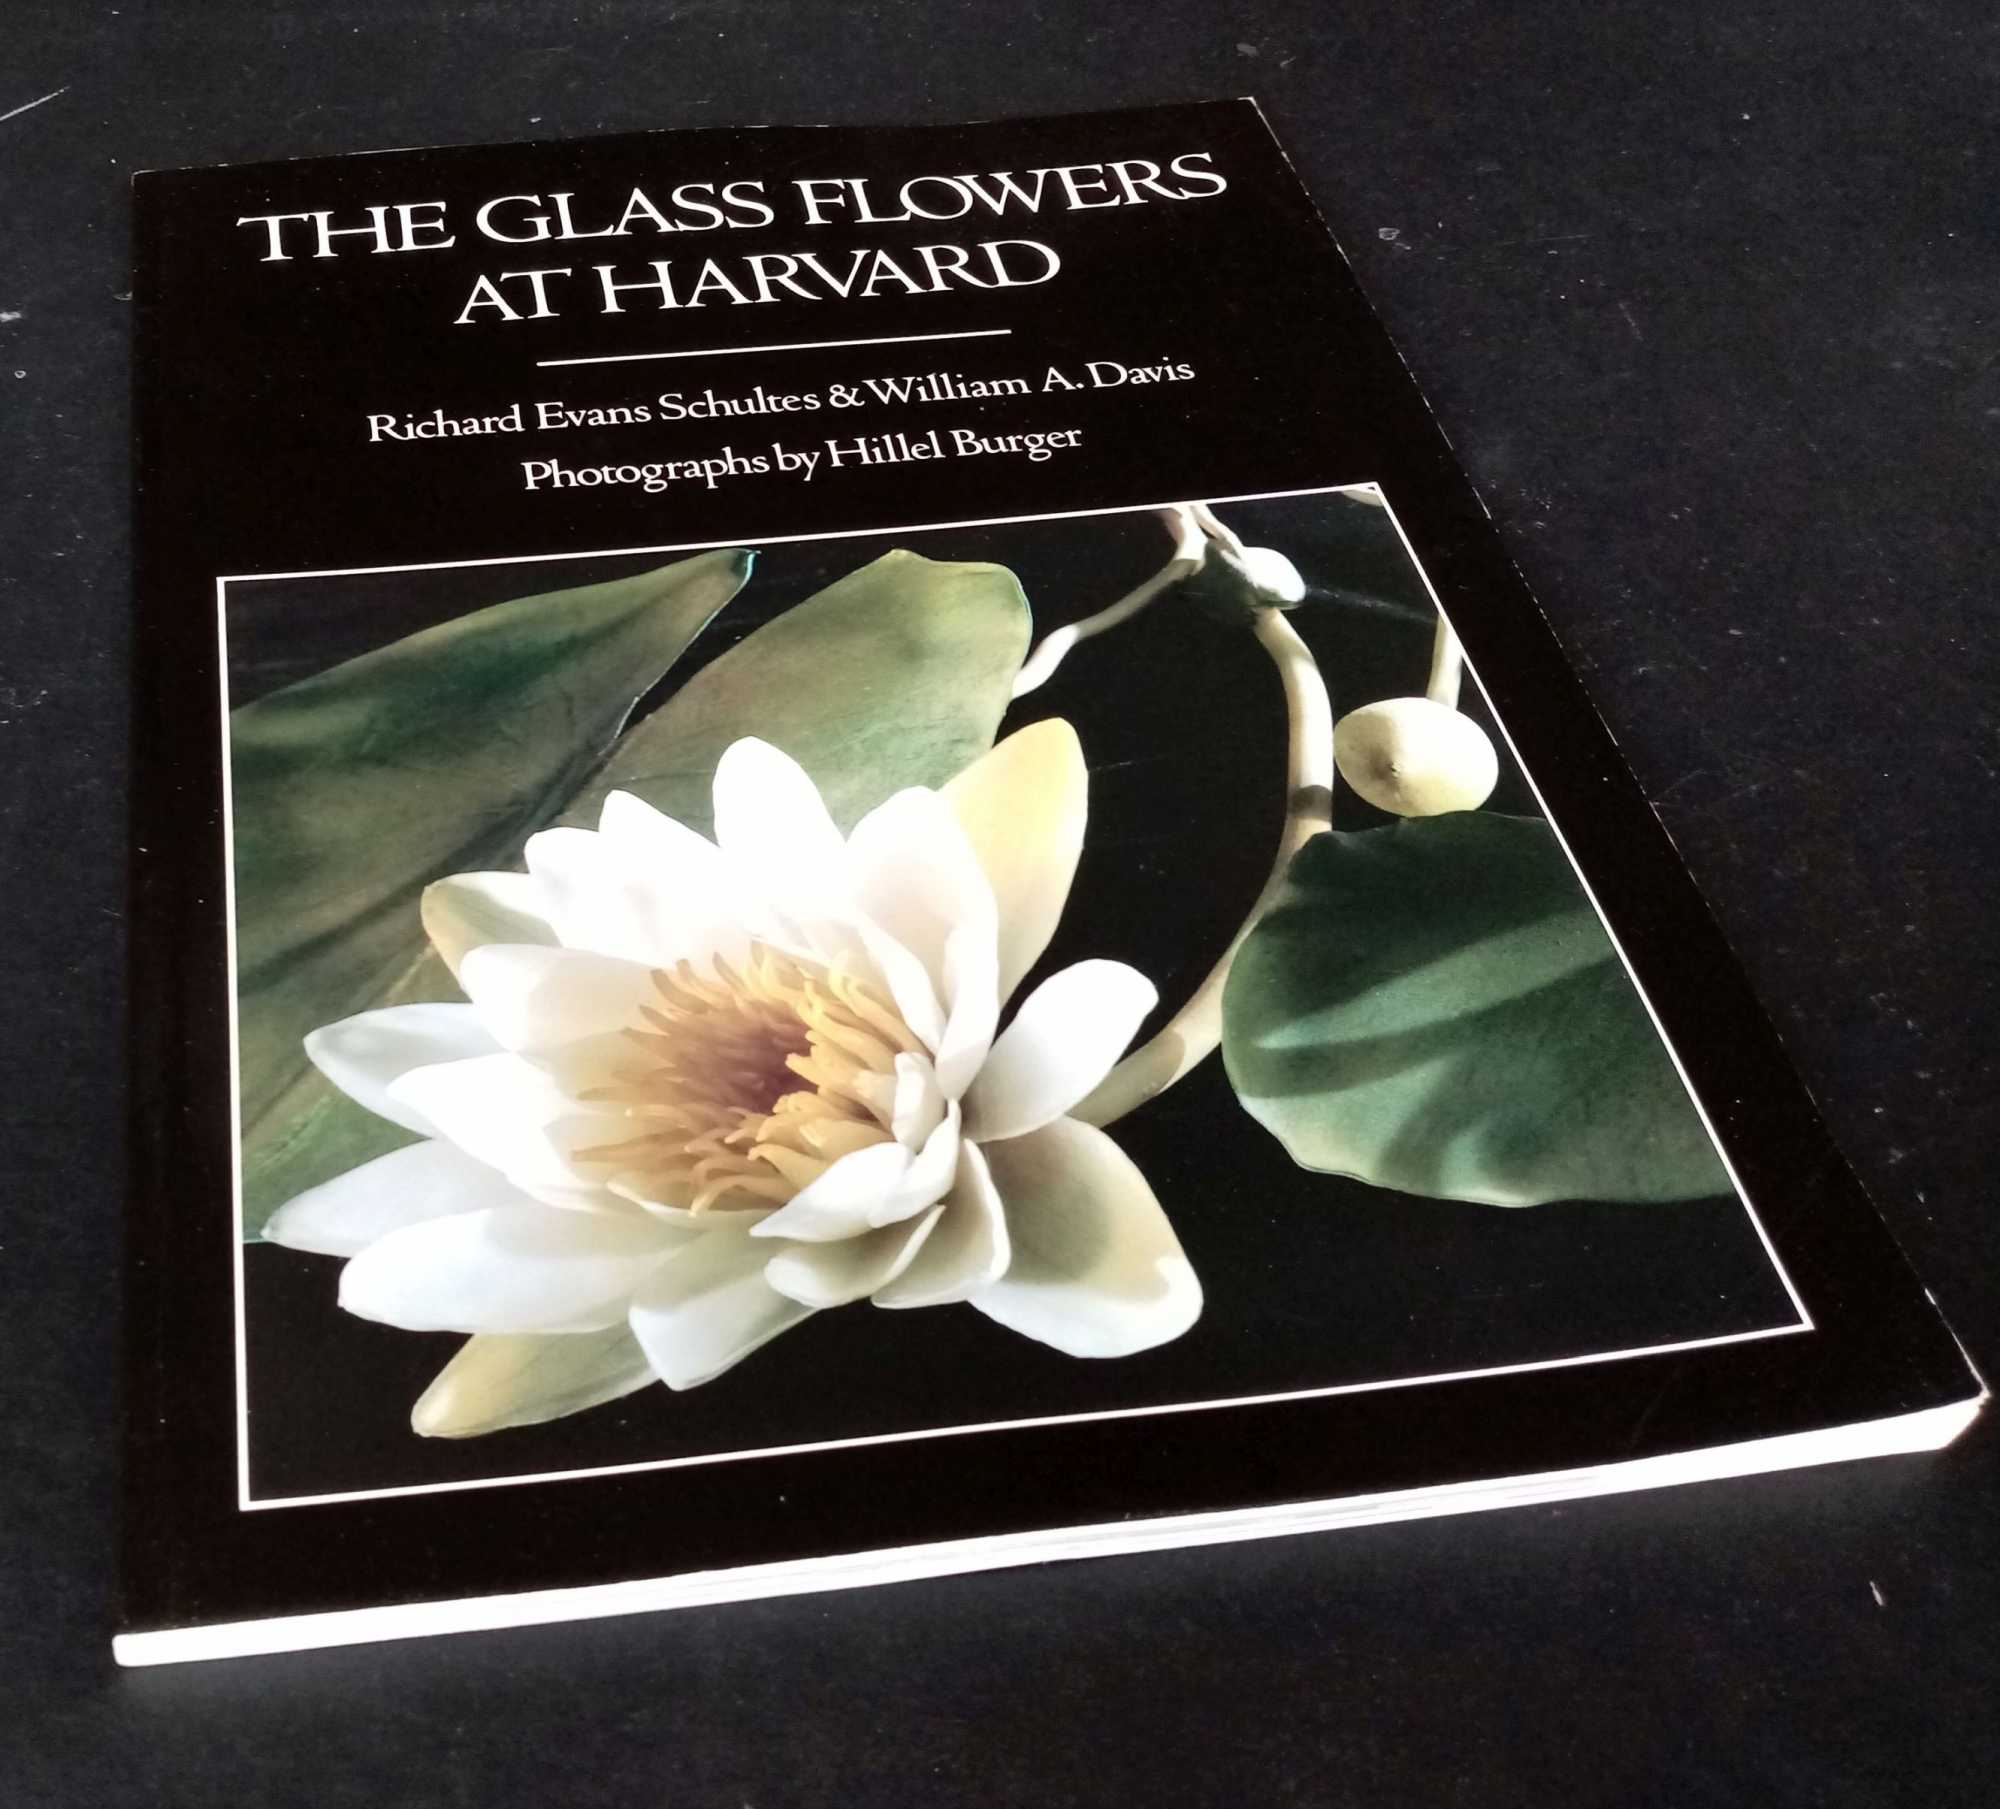 Richard Evans Schultes - The Glass Flowers at Harvard